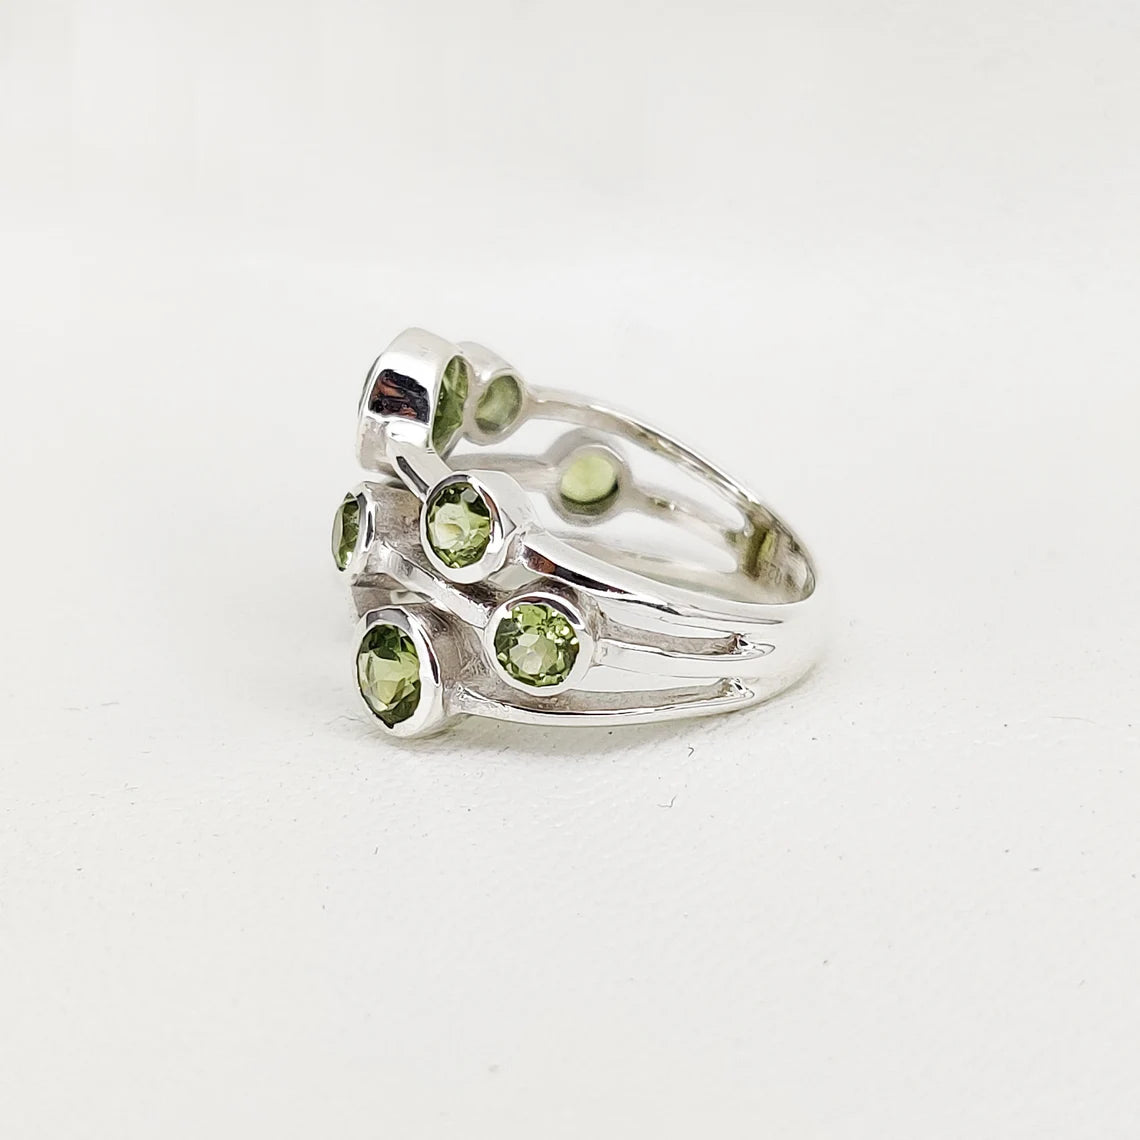 Peridot Ring, Green Bubbles Ring, August Birthstone, Natural Gemstone, Sterling Silver Ring, Modern Ring, Multi Stone Ring, Unique Gift